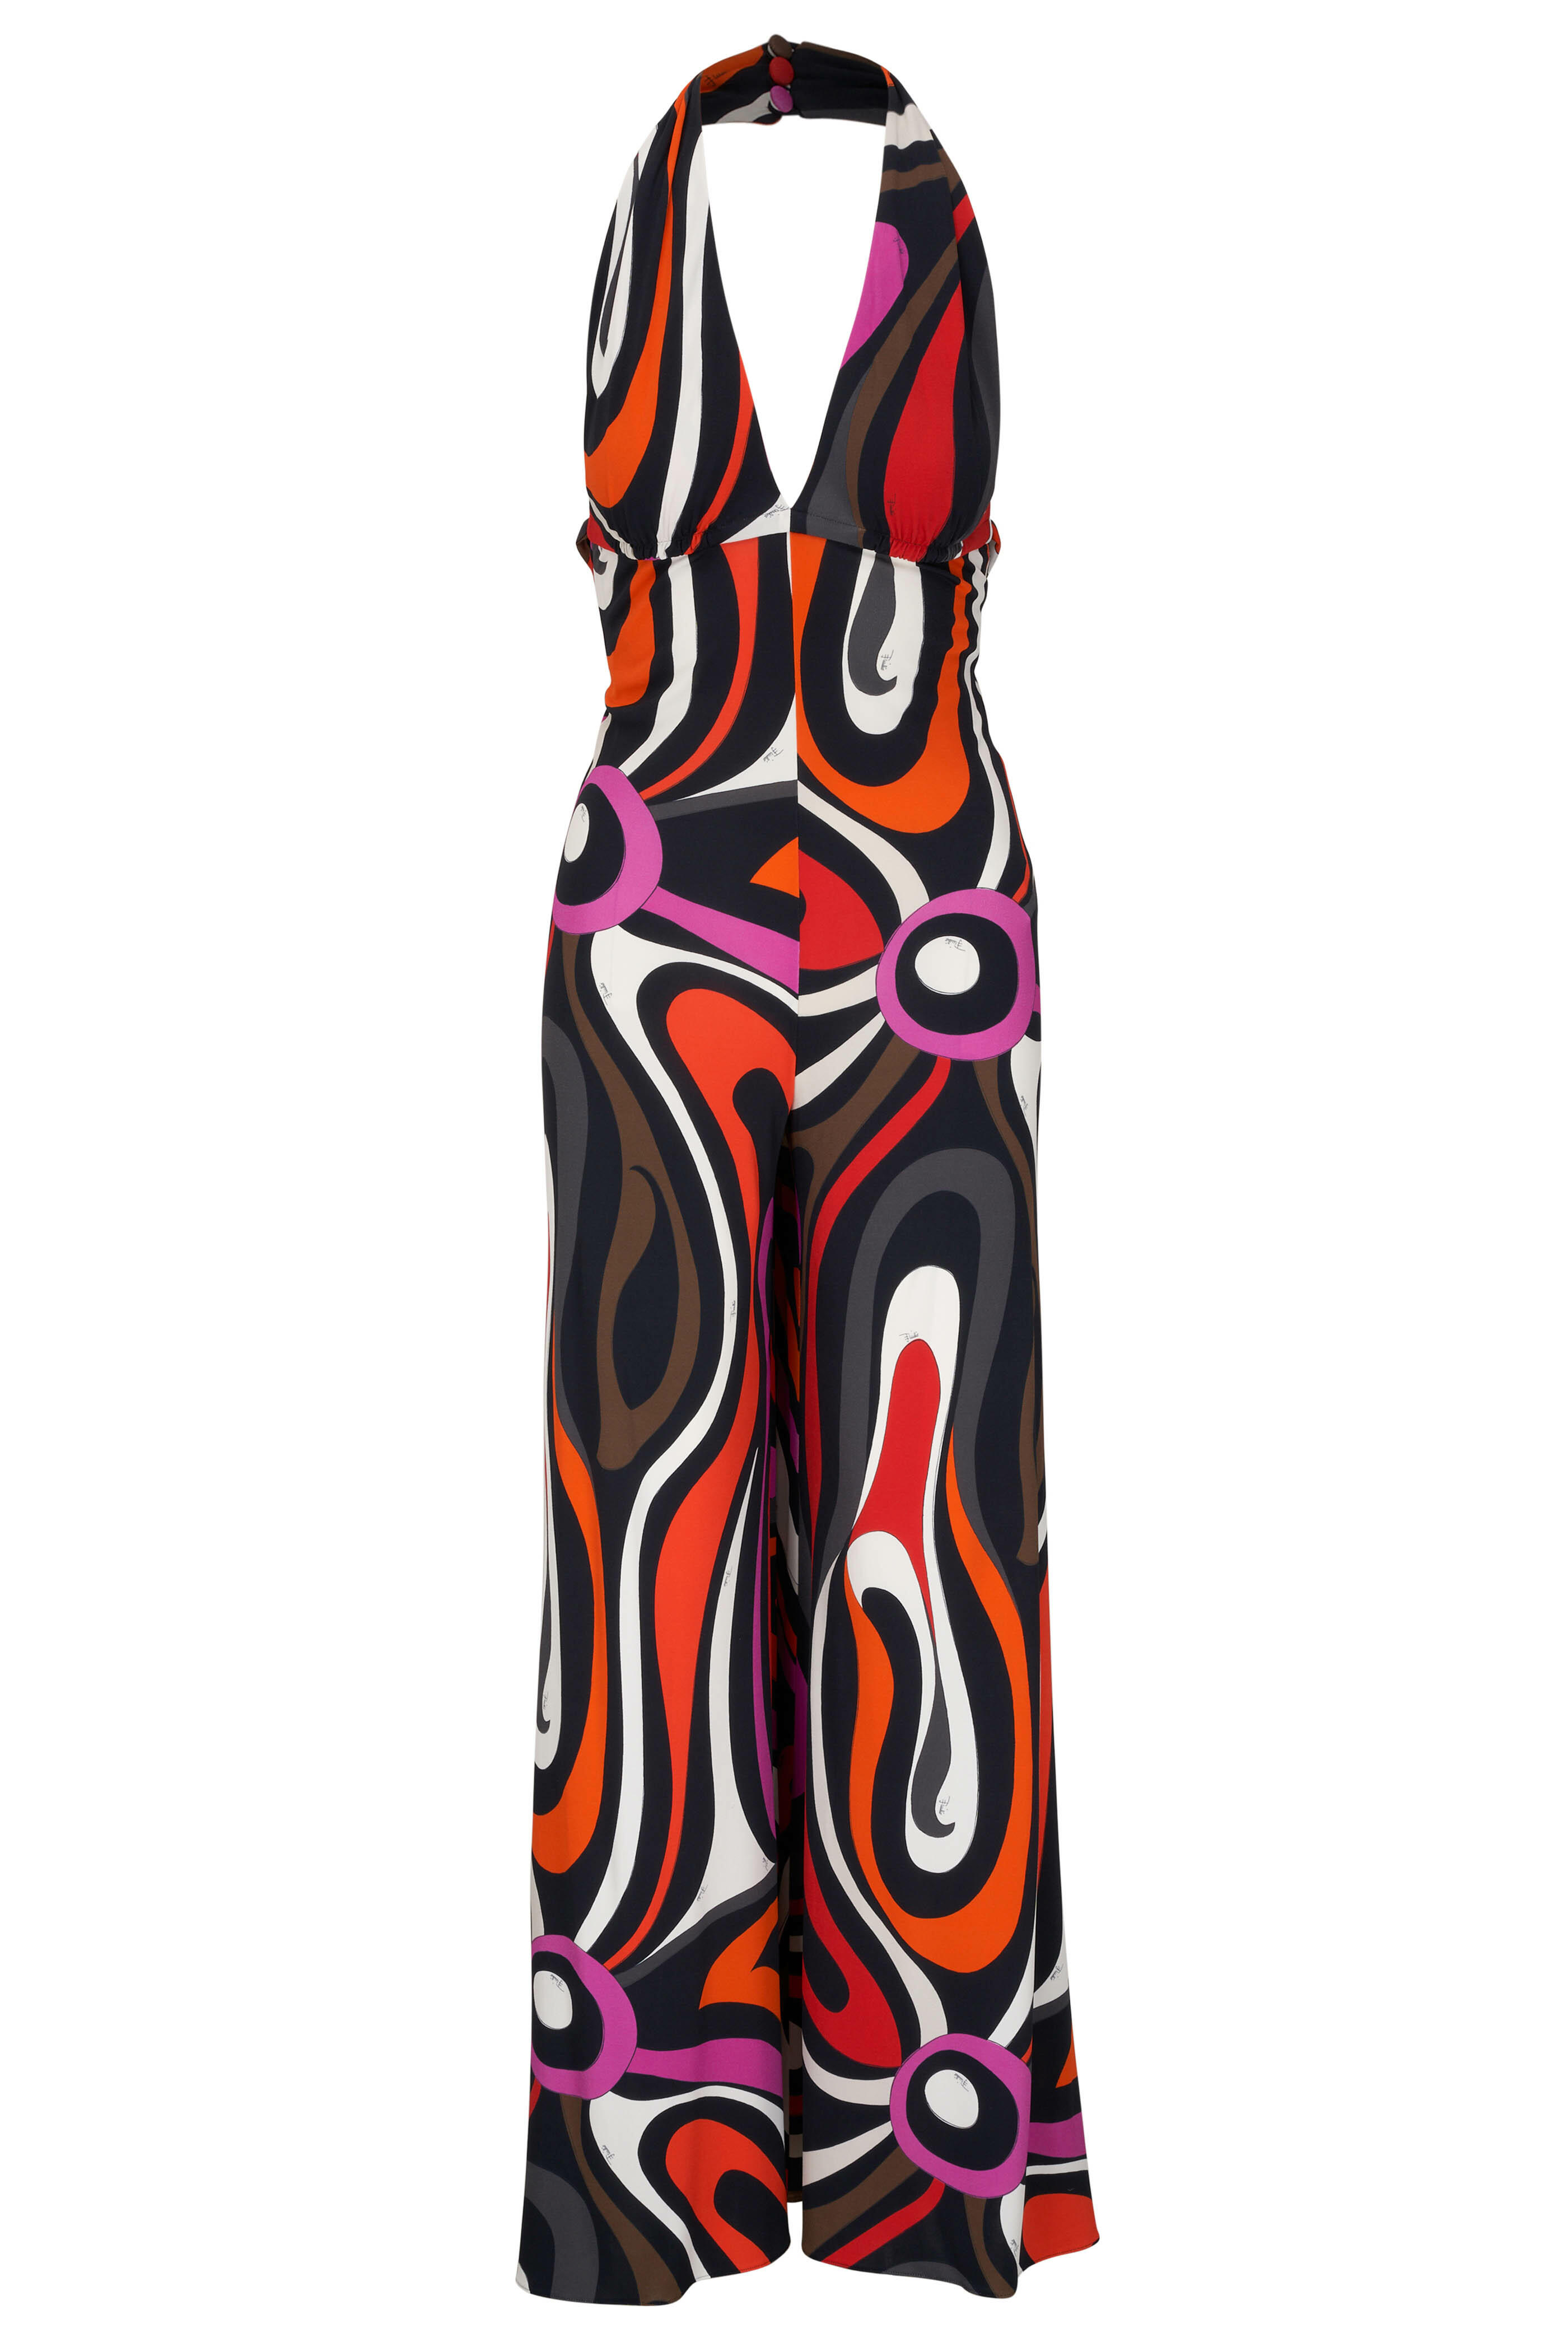 Pucci - Orange & Pink Abstract Halter Jumpsuit | Mitchell Stores